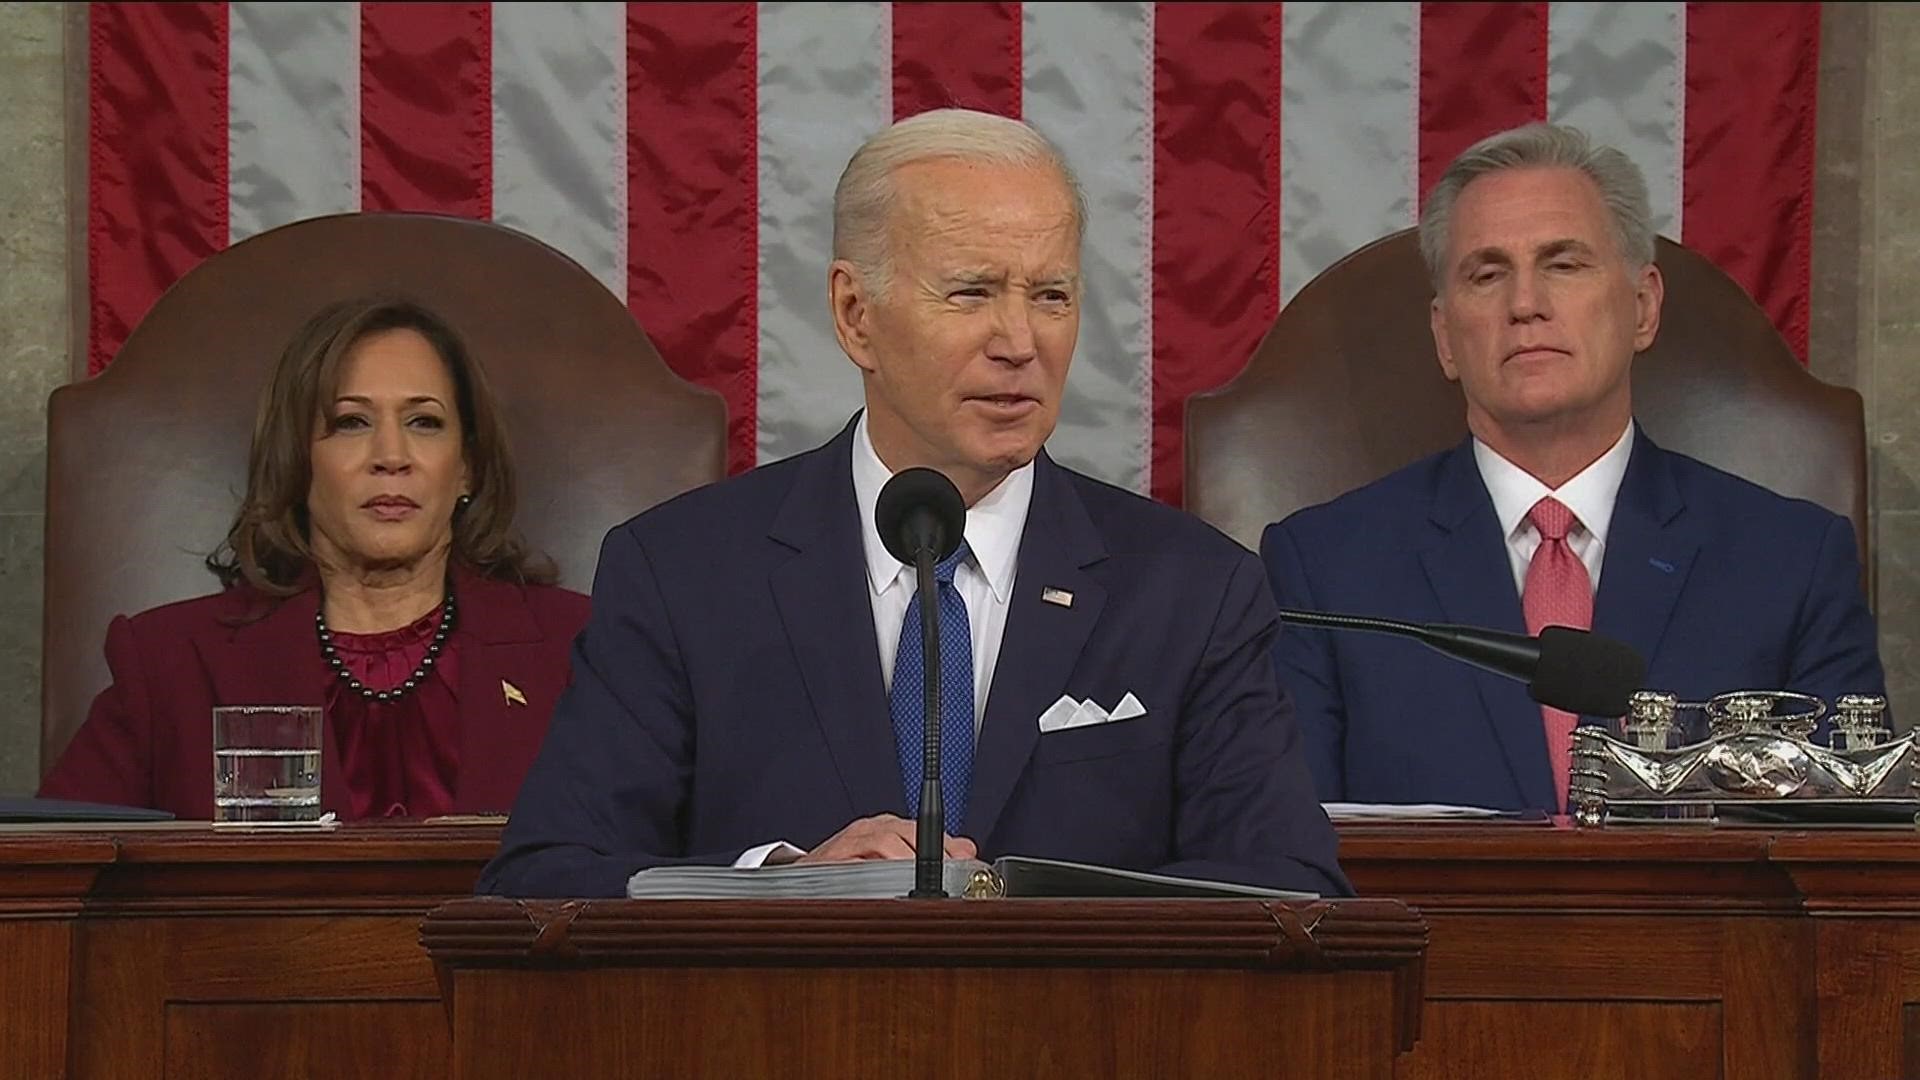 President Biden used his address Tuesday night to reassure a country beset by pessimism and fraught political divisions.